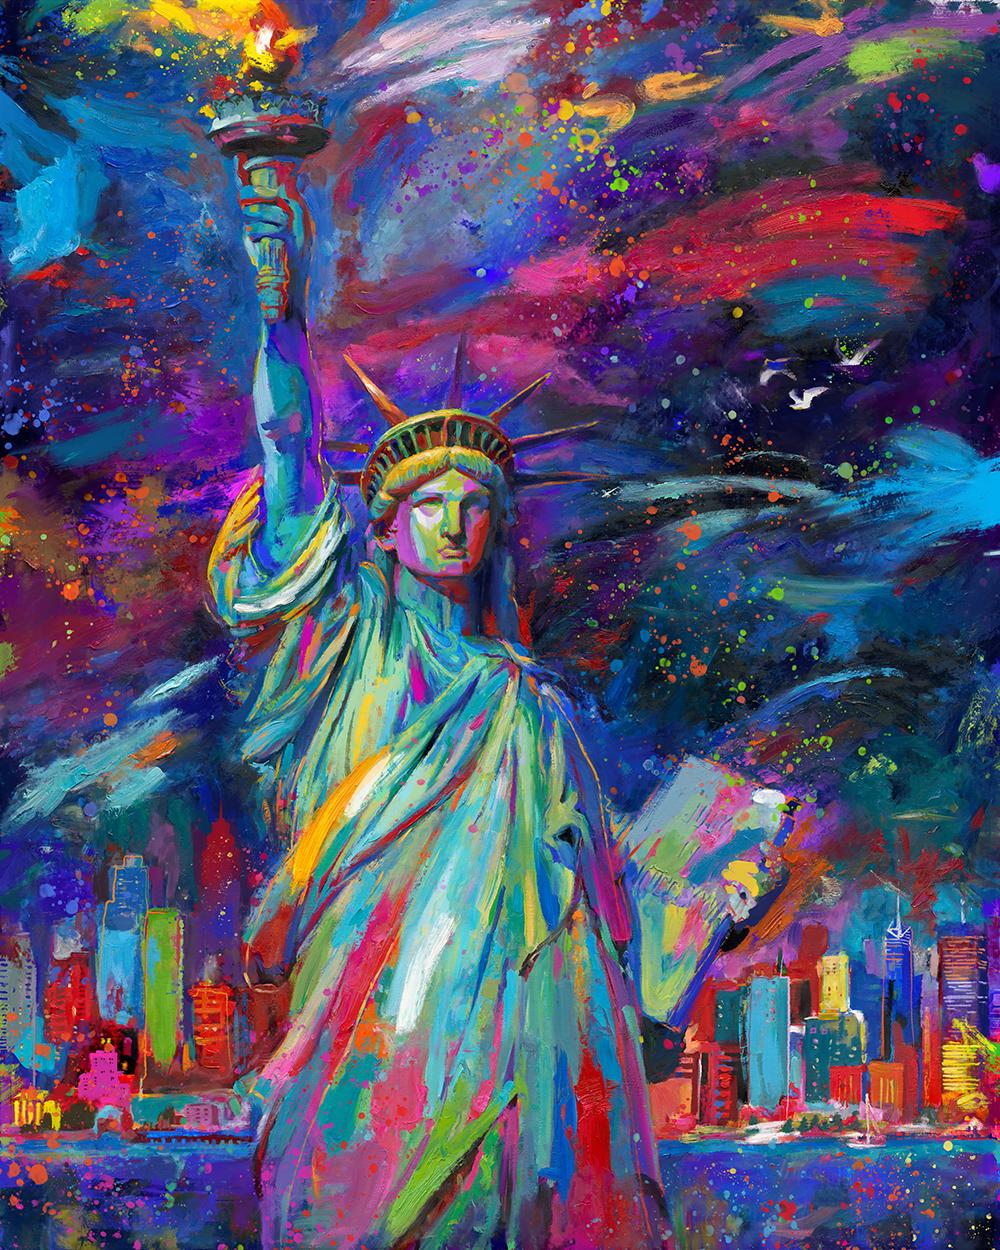 This magnificent symbol of freedom and democracy stands tall above Liberty Island in New York Harbor. Her flame of truth pierces the sky and brightens the spirits of all who gaze upon this icon of liberty. The light transforms Lady Liberty’s drapery